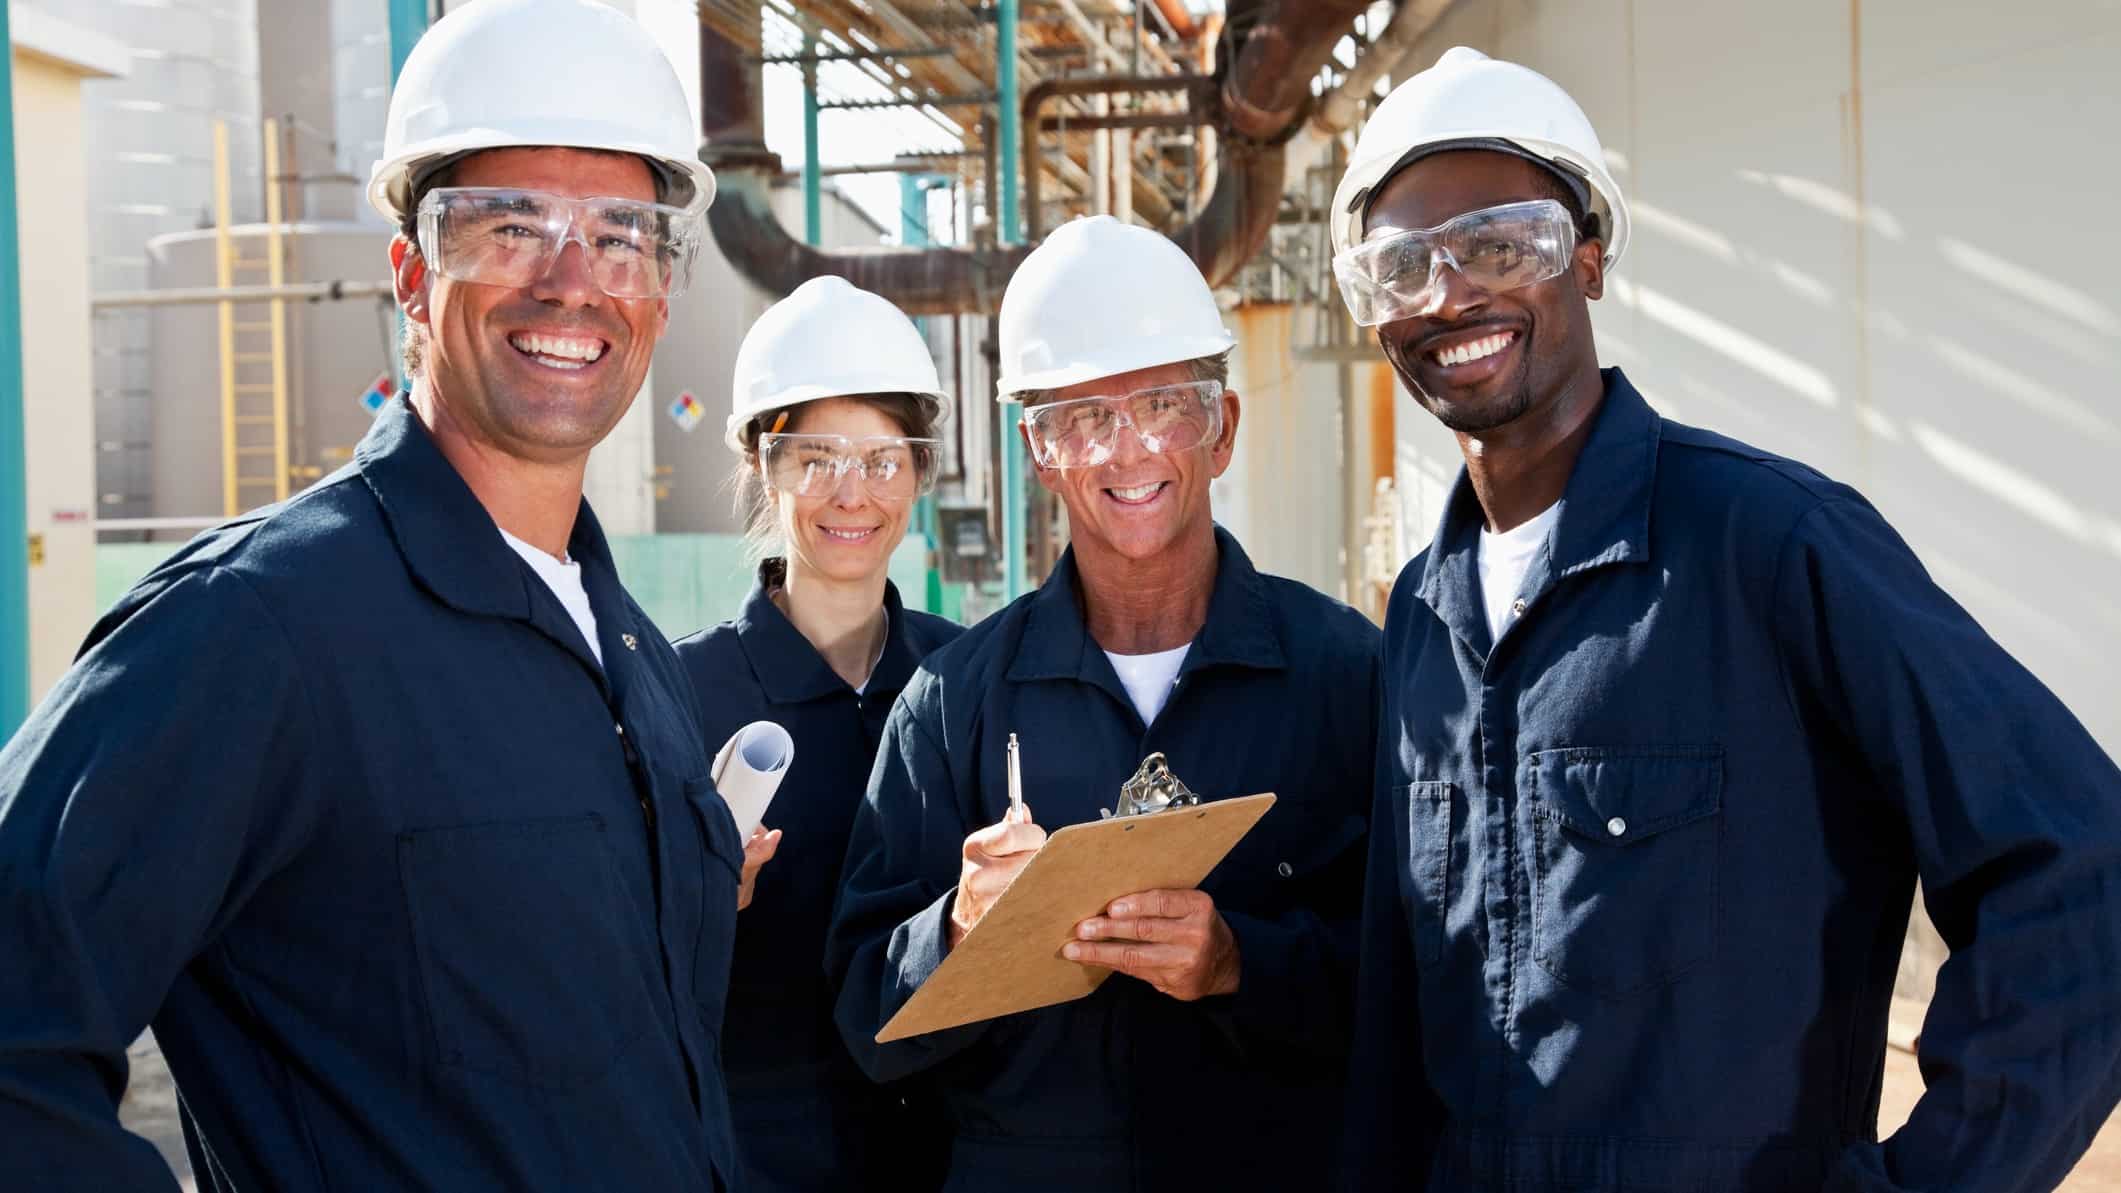 a group of four engineers stand together smiling widely wearing hard hats, overalls and protective eye glasses with the setting of a refinery plant in the background.